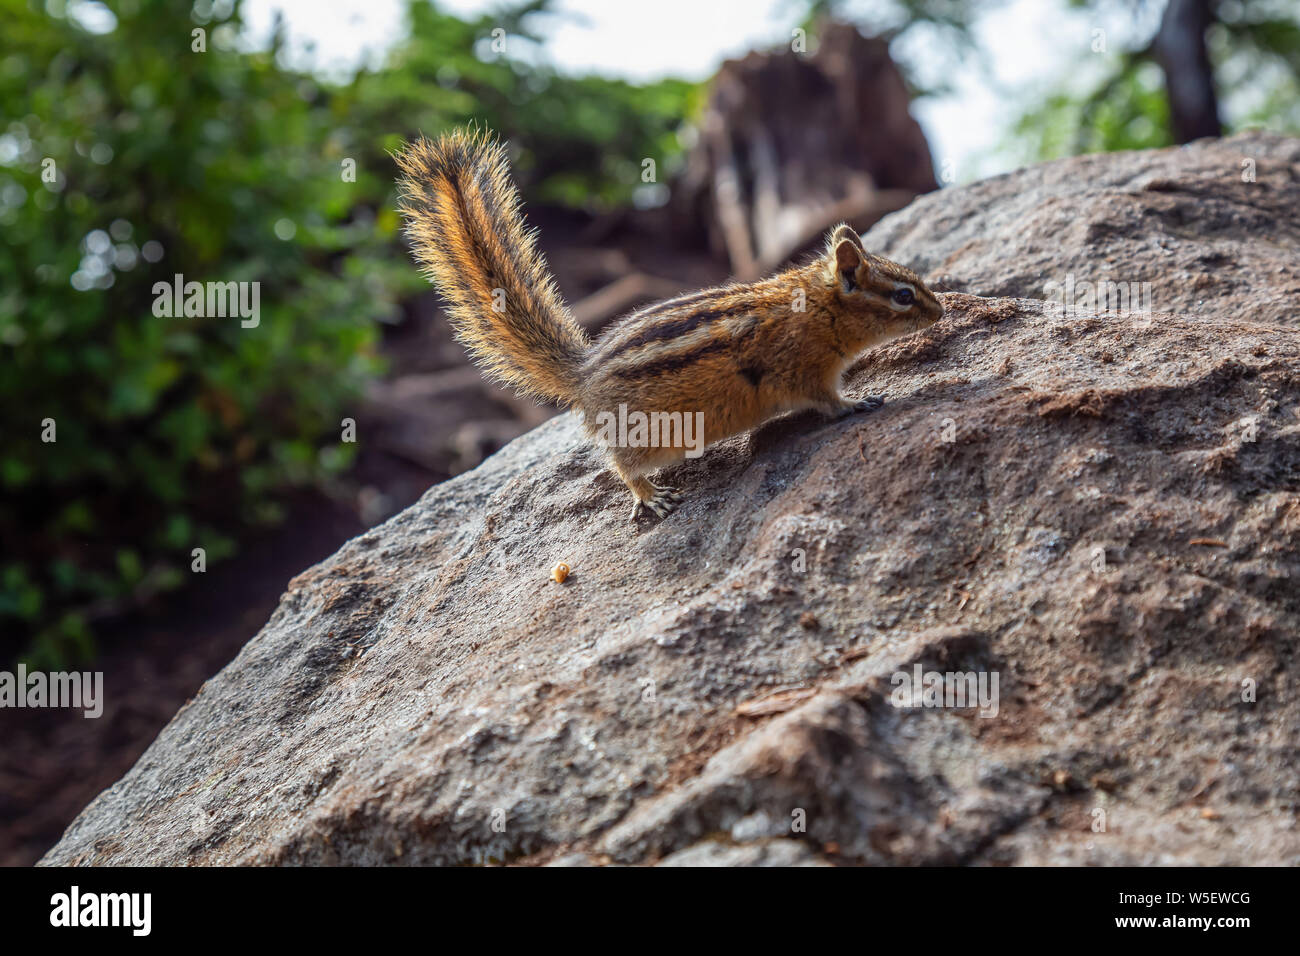 Cute little Chipmunk on a rock during a sunny summer day. Taken in Cypress Provincial Park, West Vancouver, British Columbia, Canada. Stock Photo